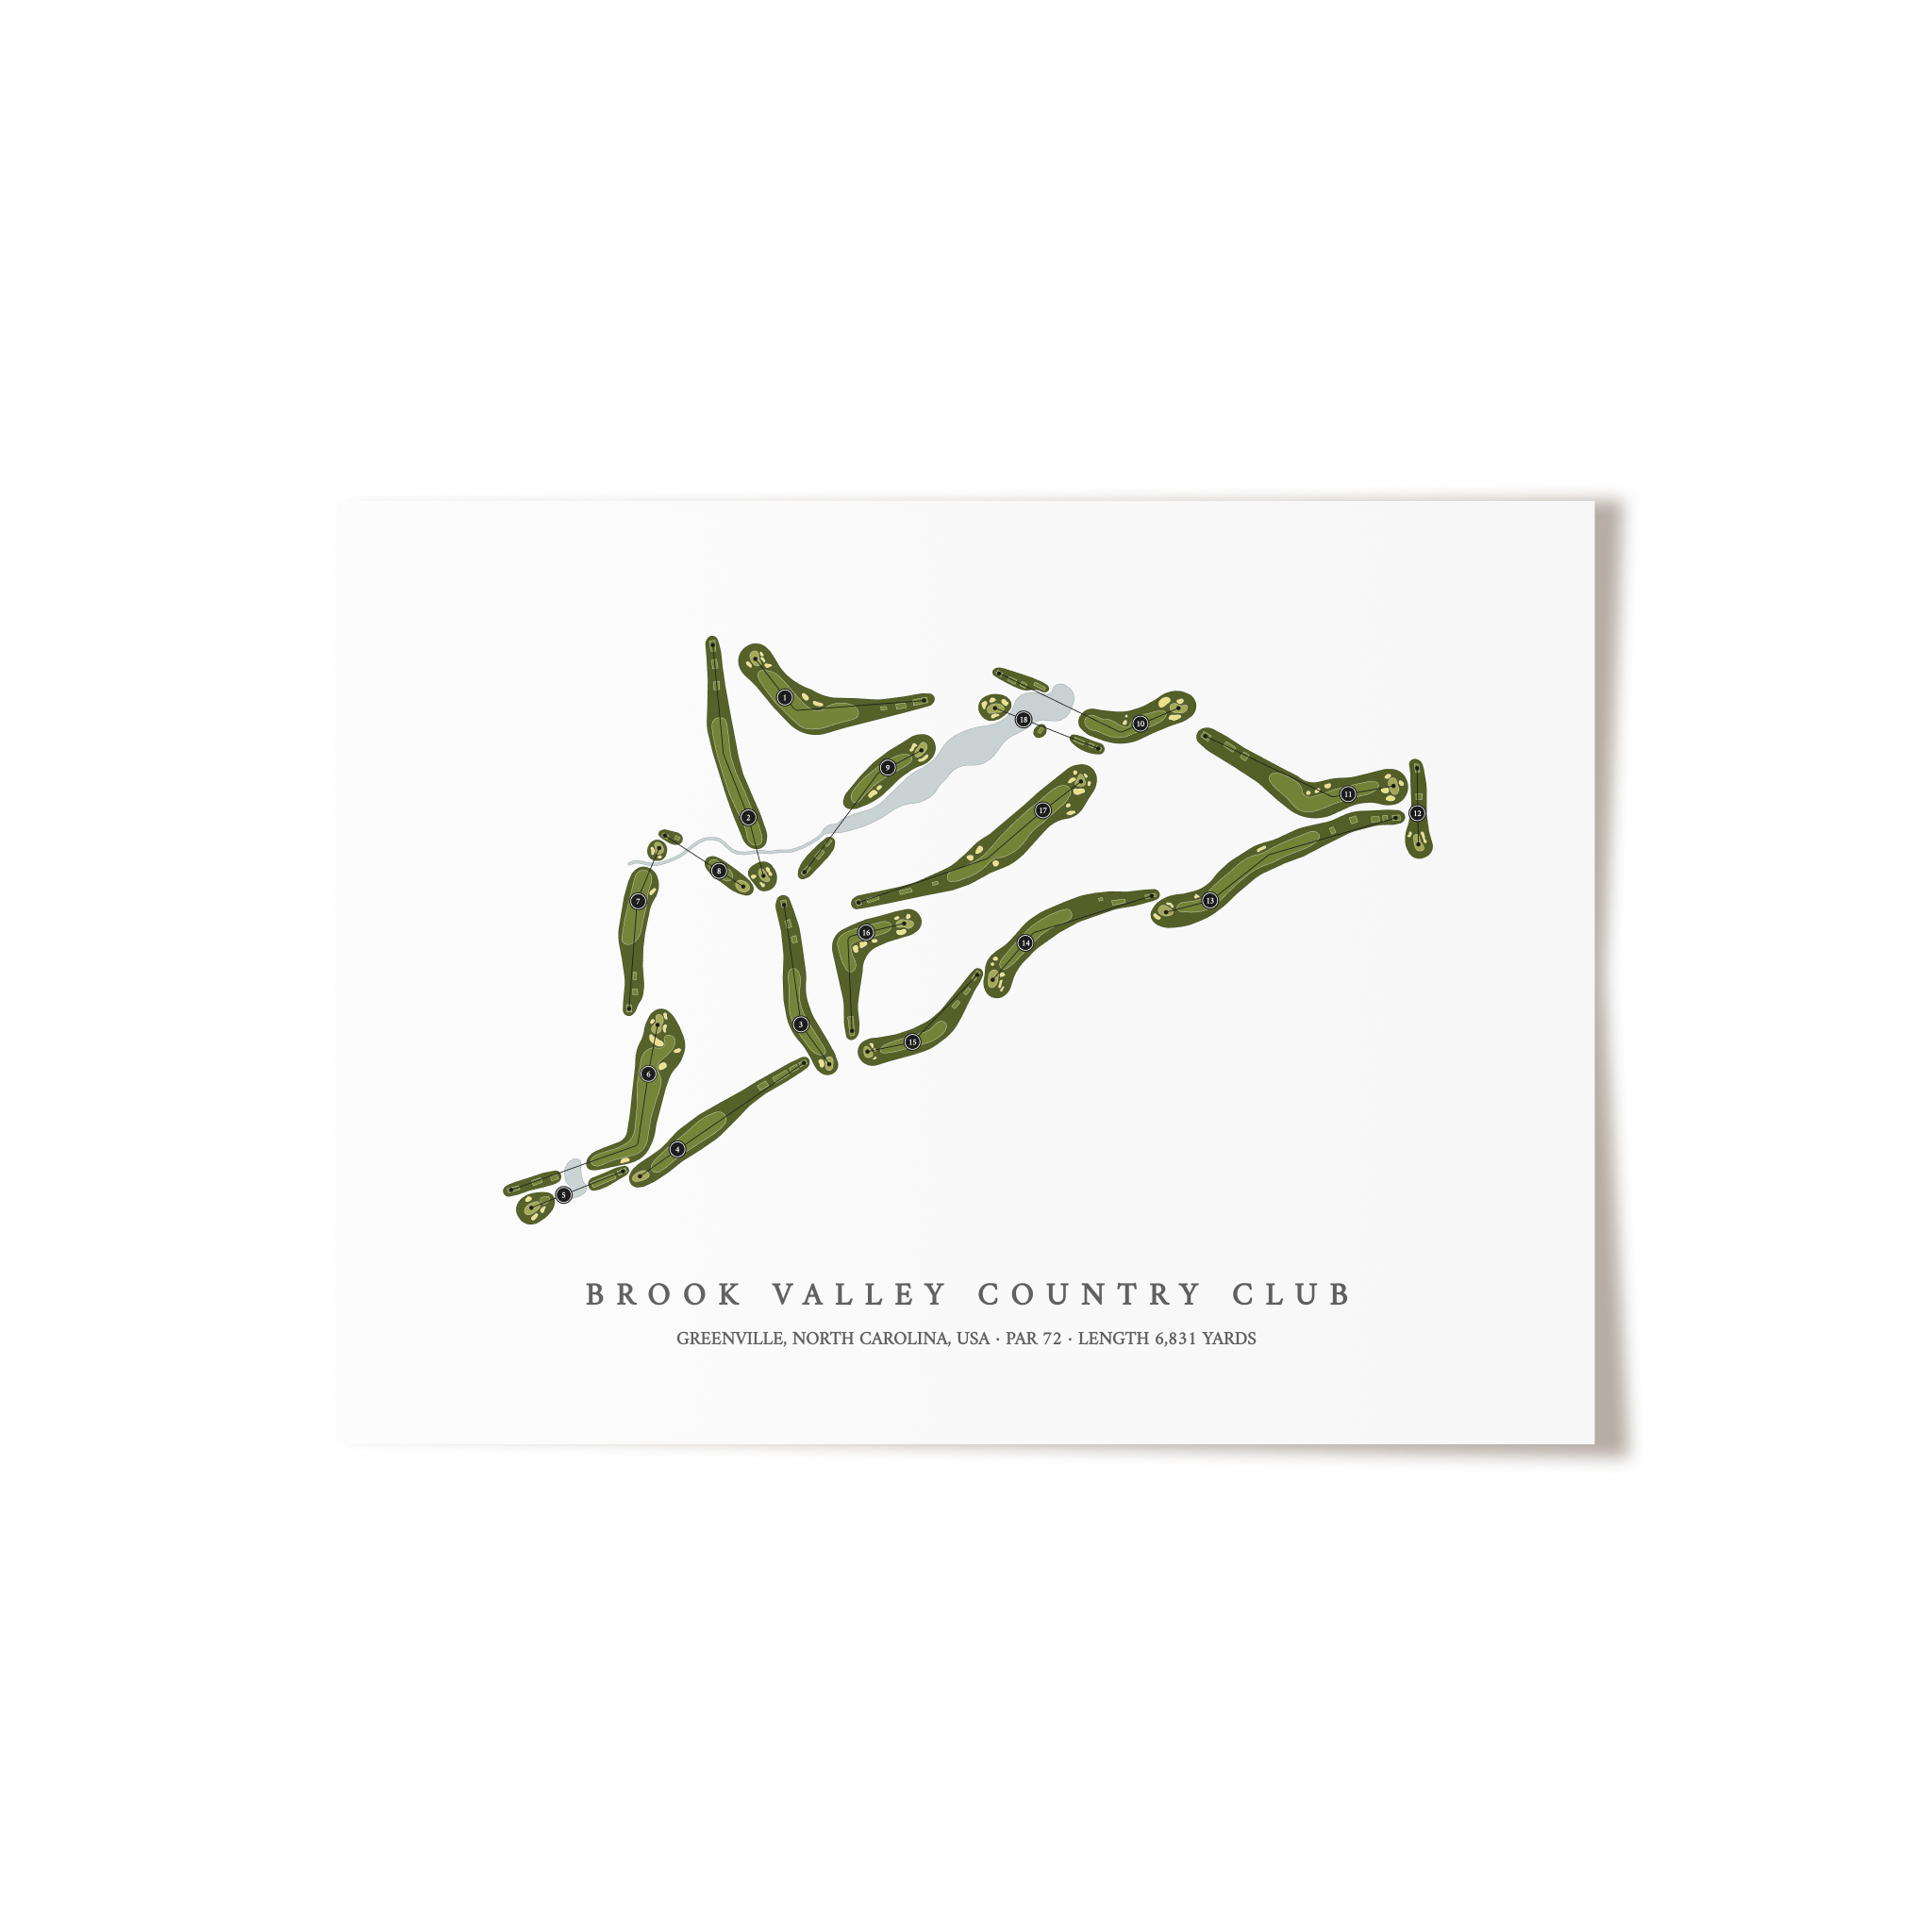 Brook Valley Country Club | Golf Course Map | Unframed 